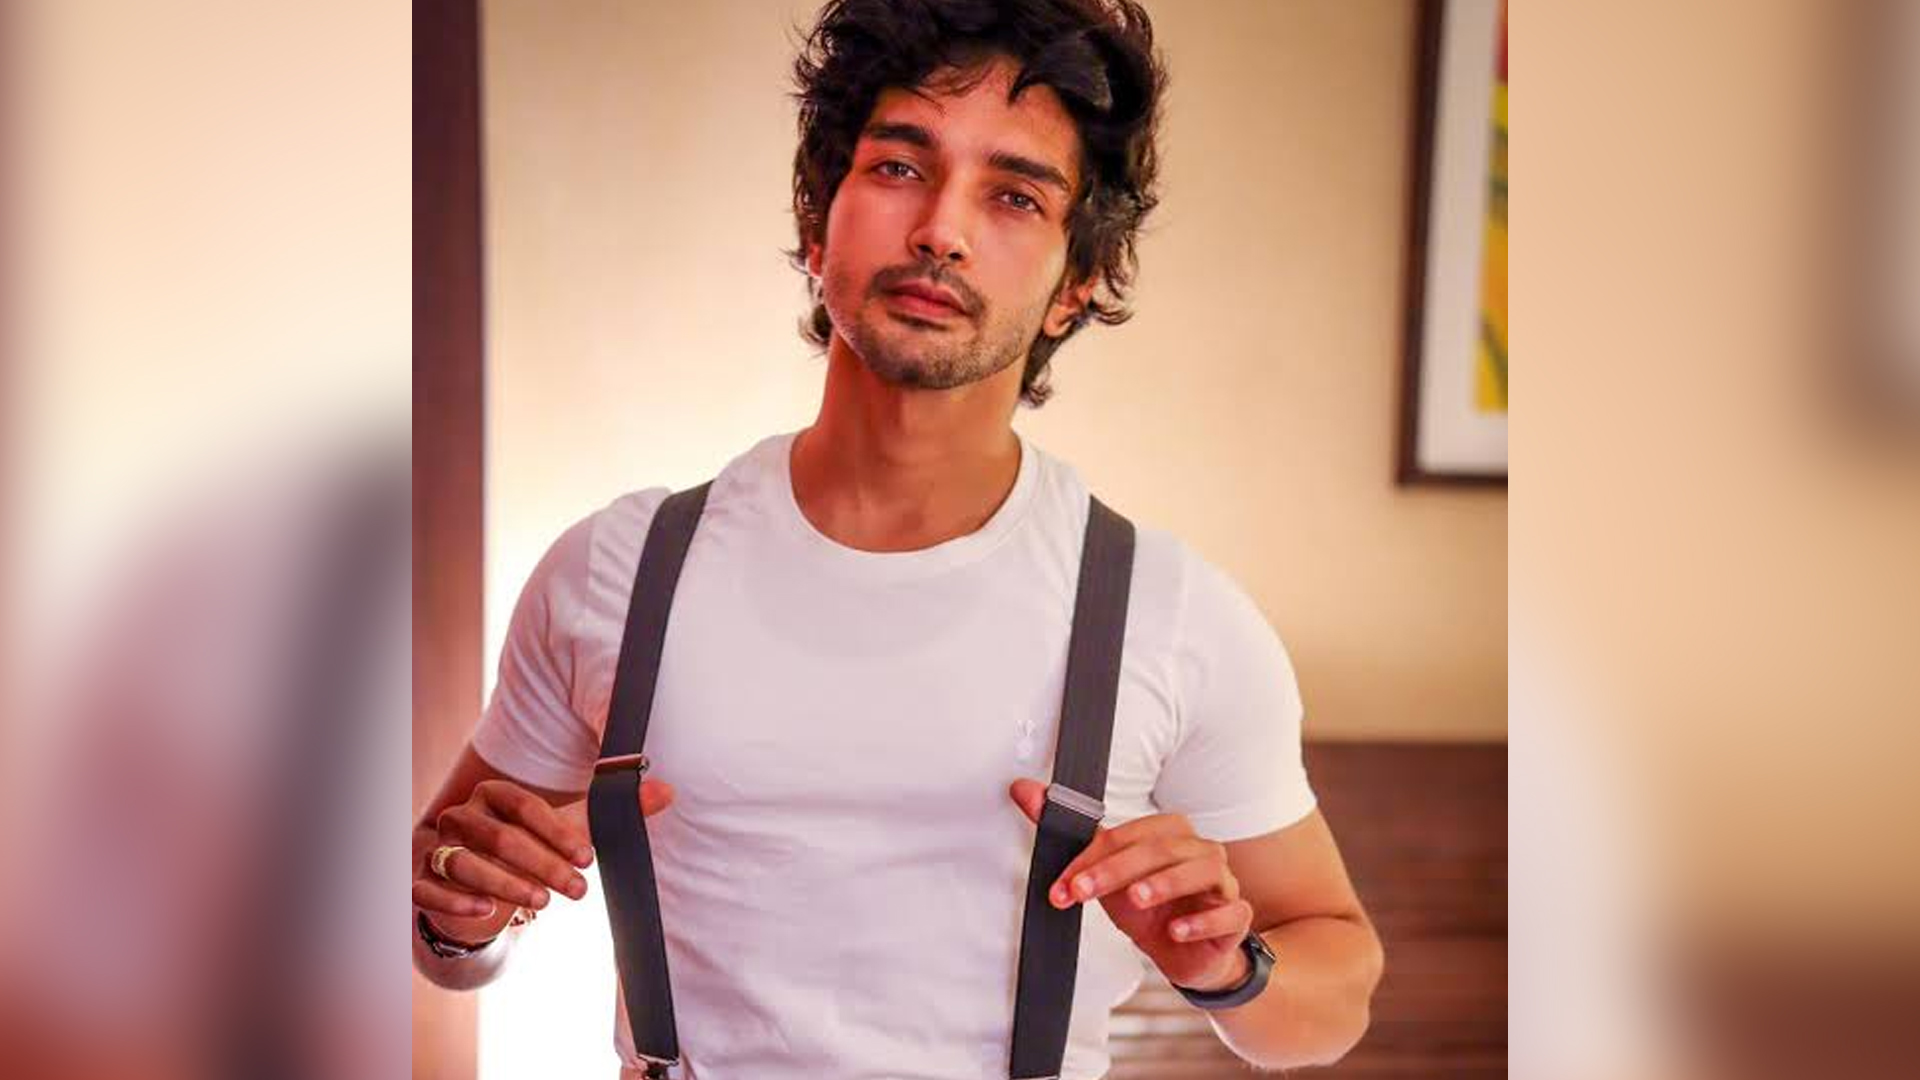 “Romi is full of intrigue and suspense, this is for the first time that I will be essaying such a character”, shares Harsh Rajput aka Romi on his entry in Star Plus show Teri Meri Doriyaann.